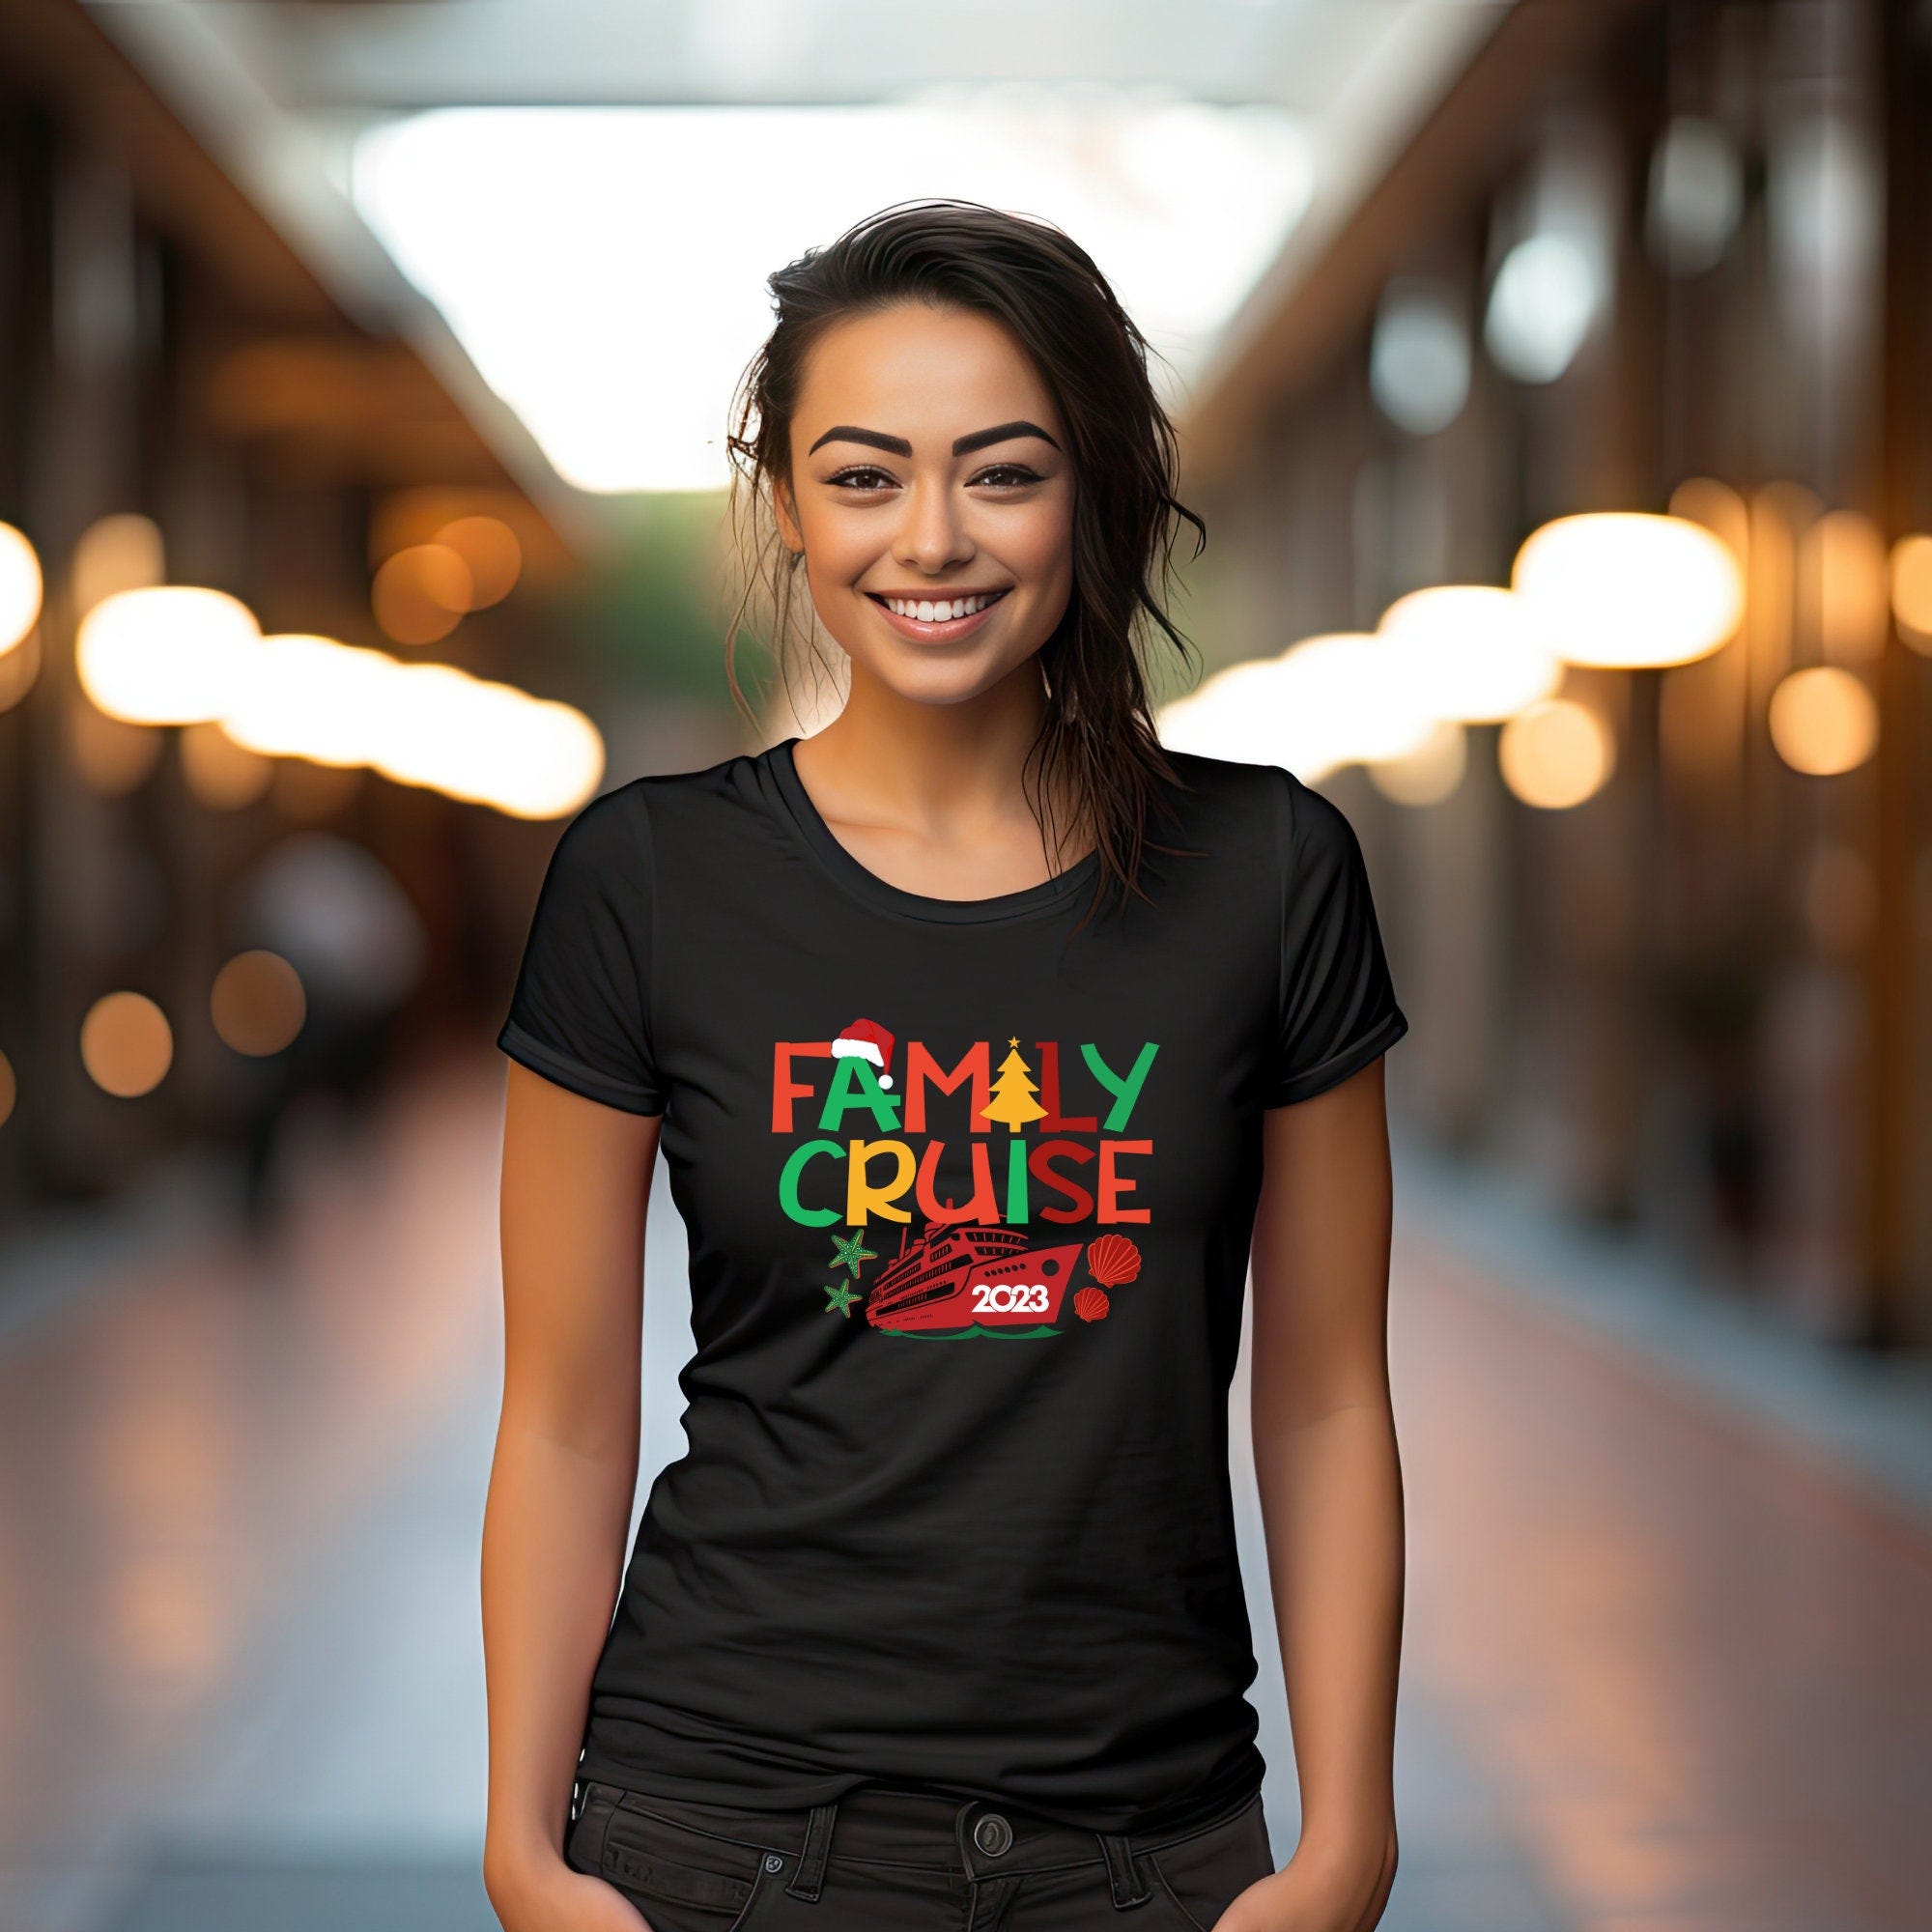 Christmas Cruise Crew Shirts,Most Likely Cruise Shirt,Most Likely To Christmas Tee,Christmas Cruise Shirt,Family Cruise Shirt,Christmas Gift